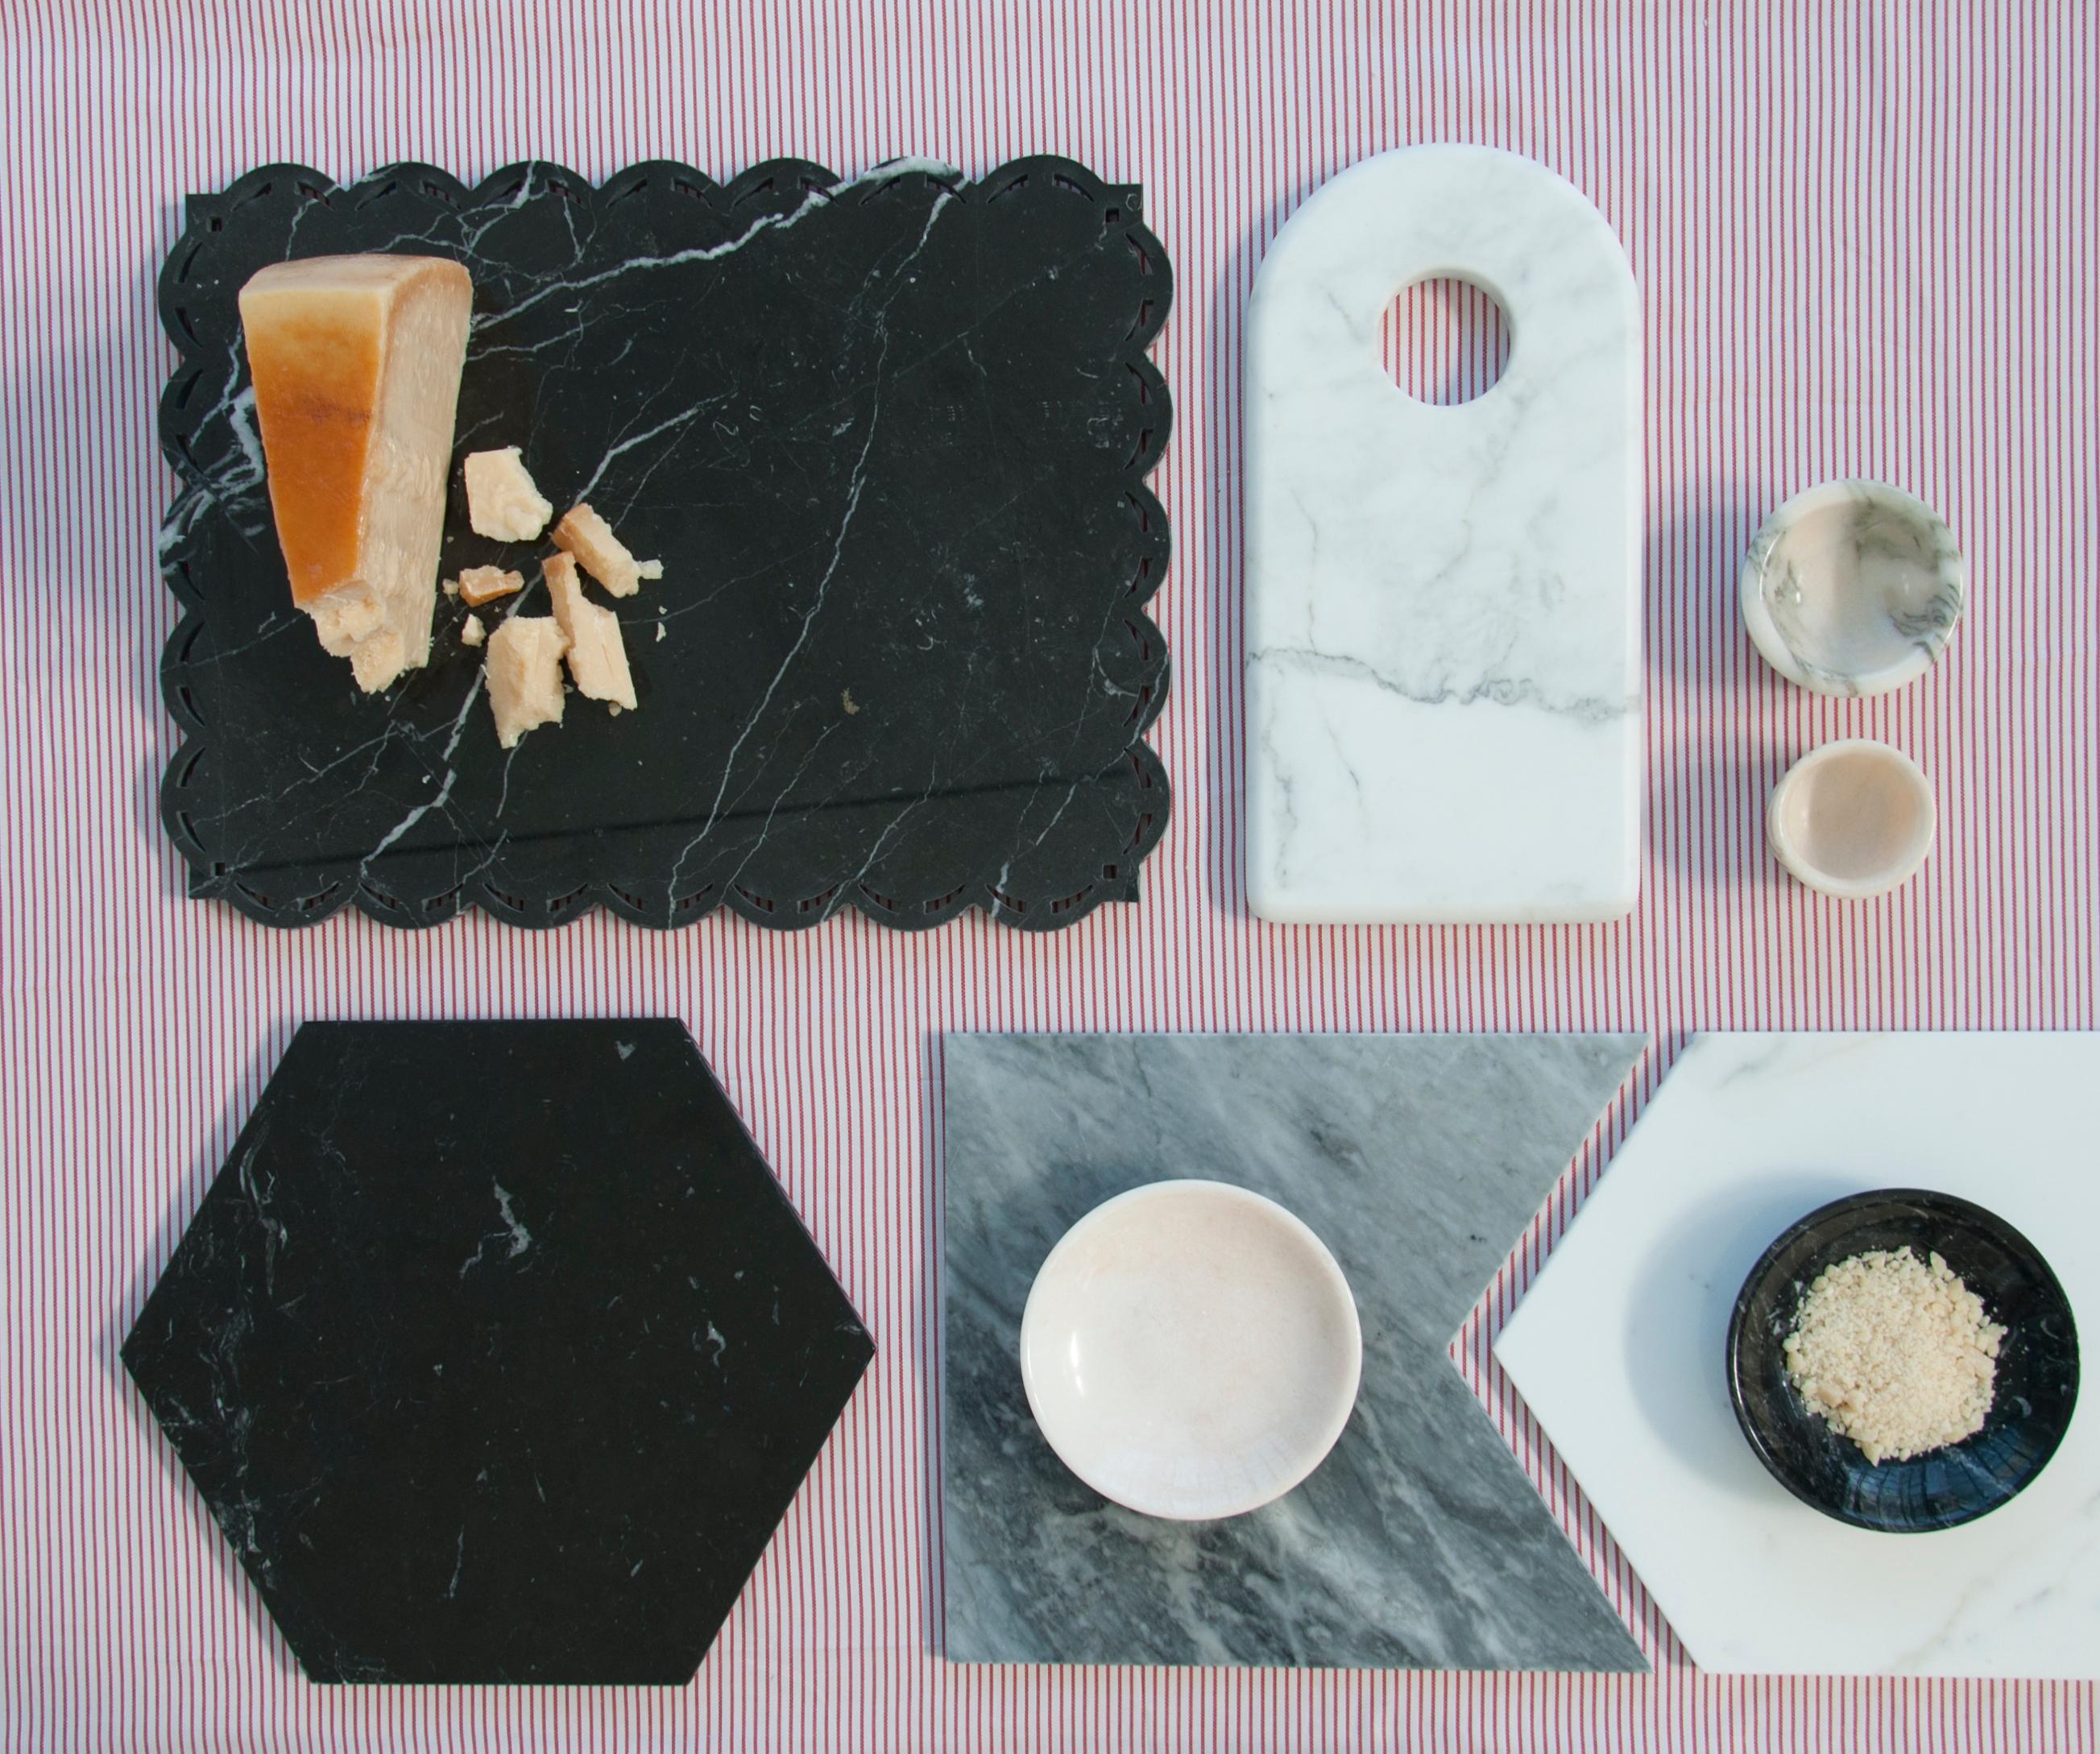 Hexagonal black Marquina marble plate/cutting board with cork underneath. Each piece is in a way unique (every marble block is different in veins and shades) and handmade by Italian artisans specialized over generations in processing marble. Slight